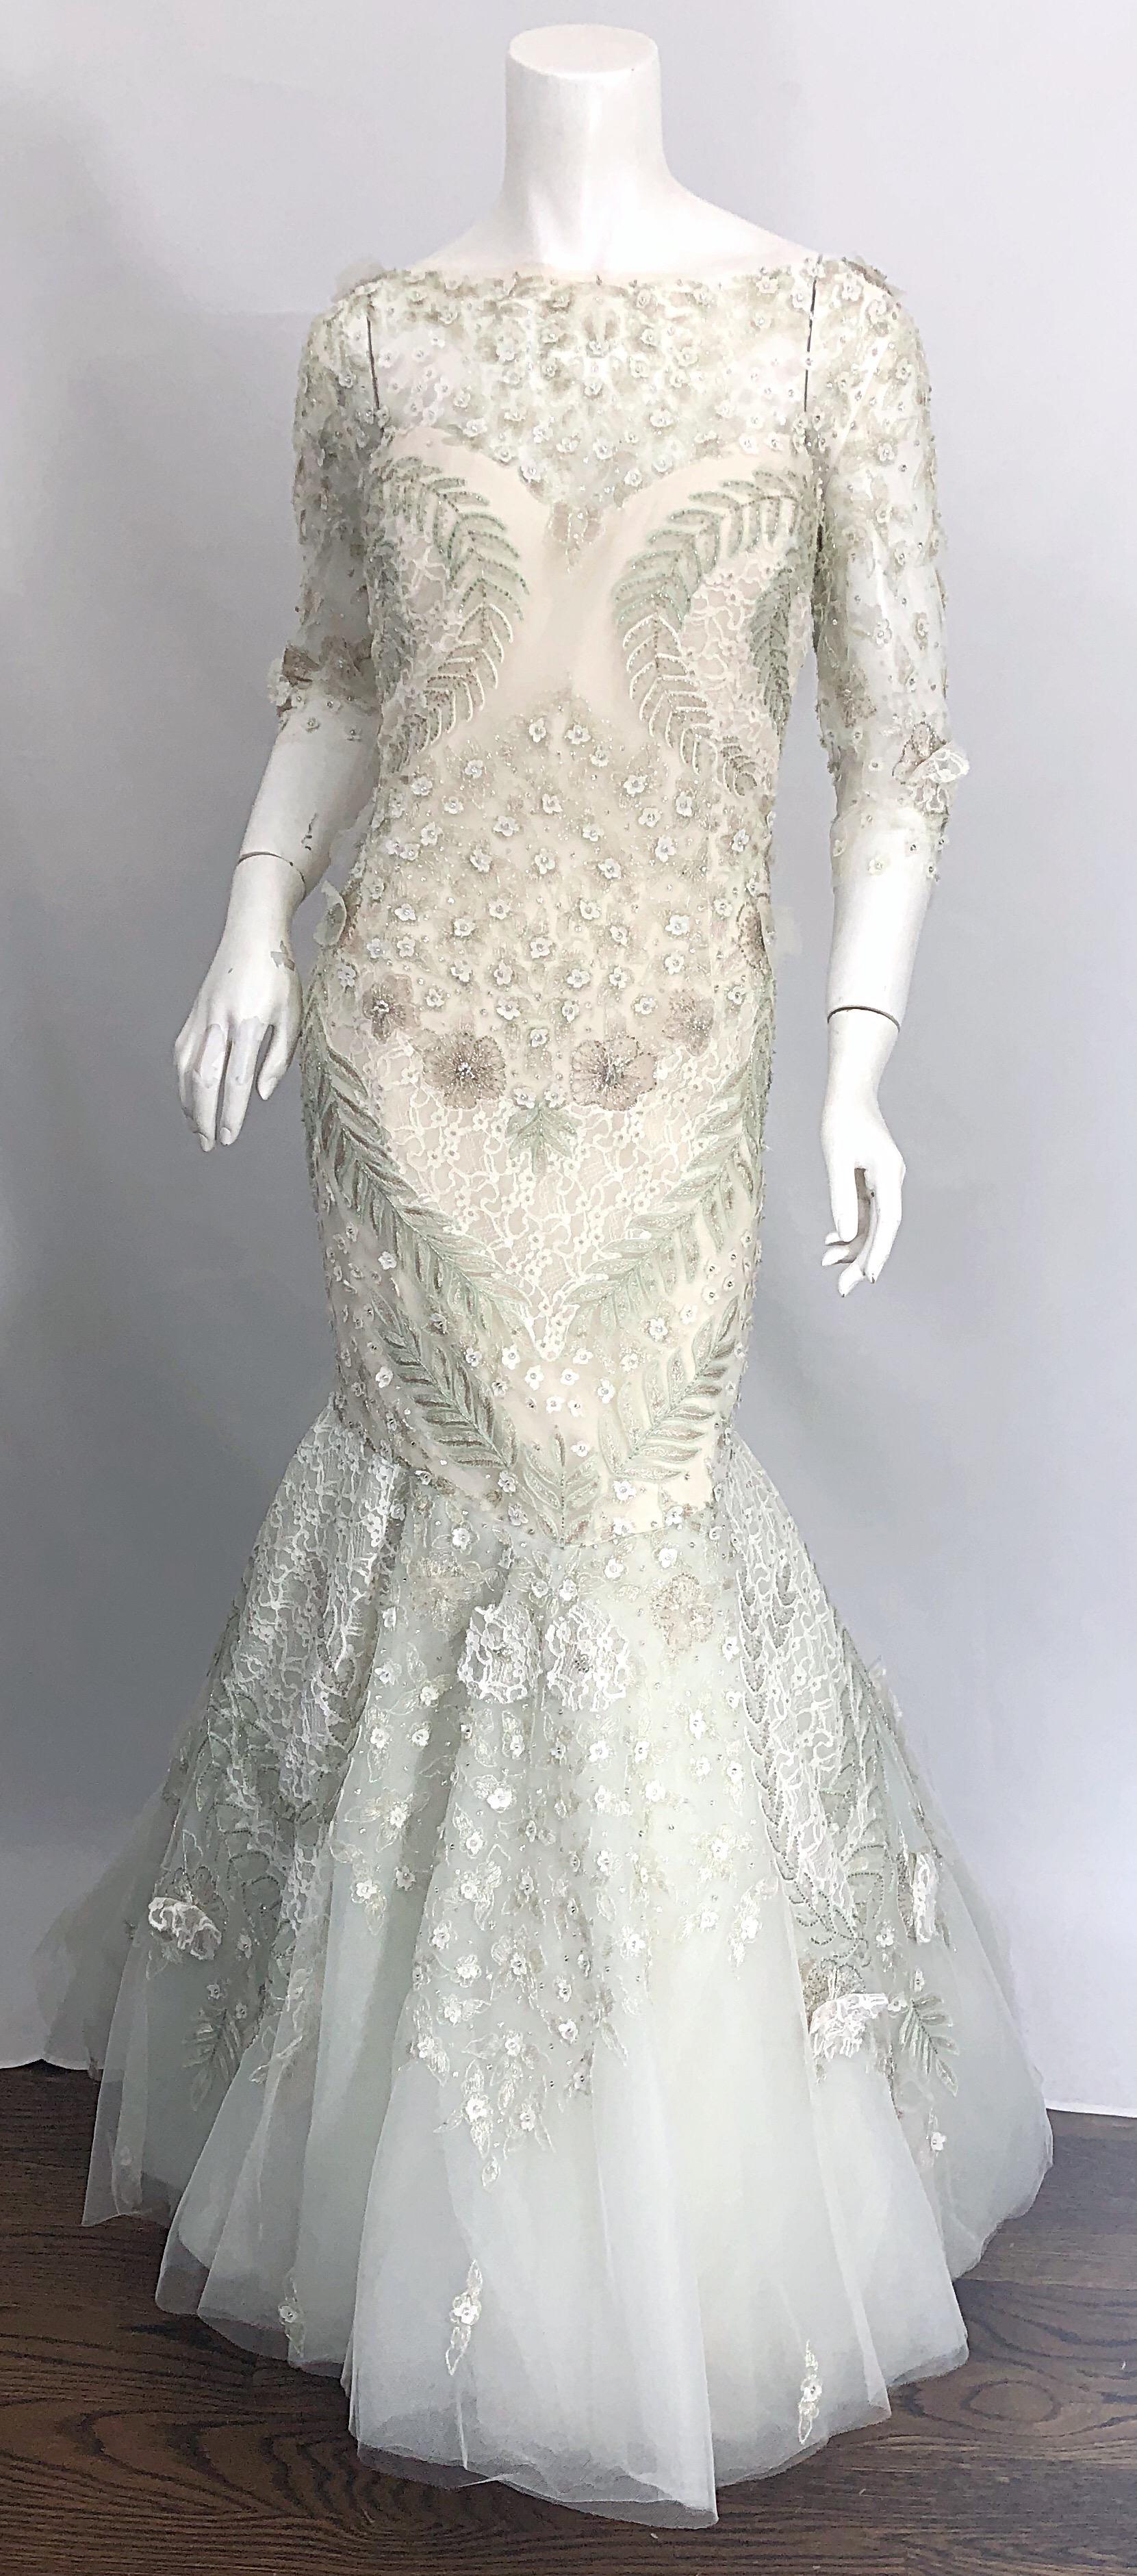 Monique Lhuillier Size 14 Mint Green Ivory Beaded Sequined Mermaid Gown Dress For Sale 7